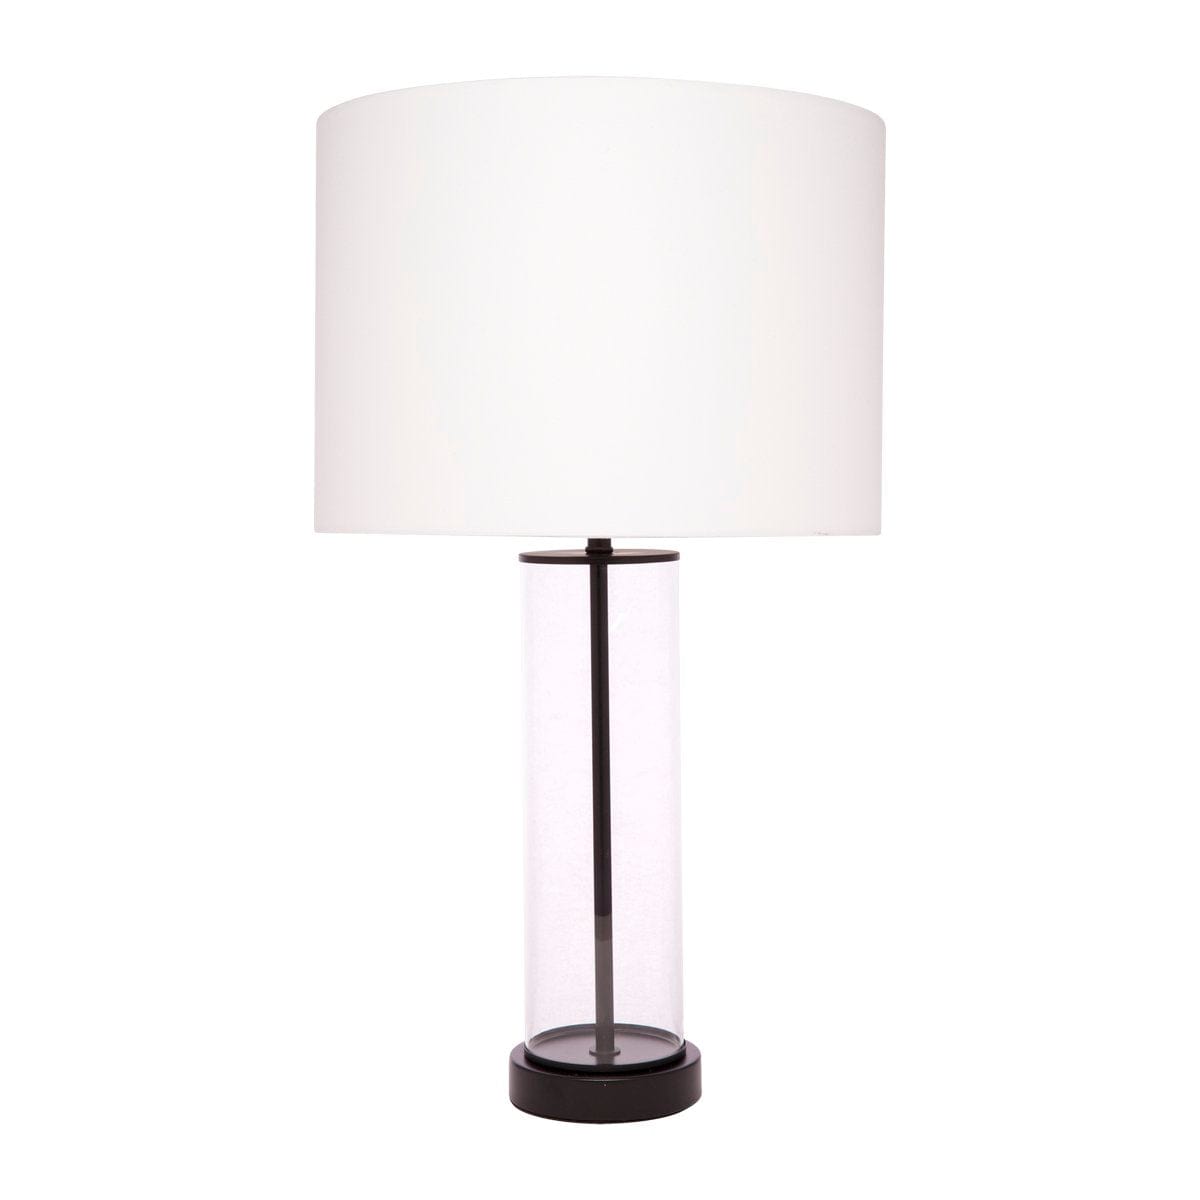 CAFE LIGHTING & LIVING Table Lamp East Side Table Lamp - Black with White Shade 12360